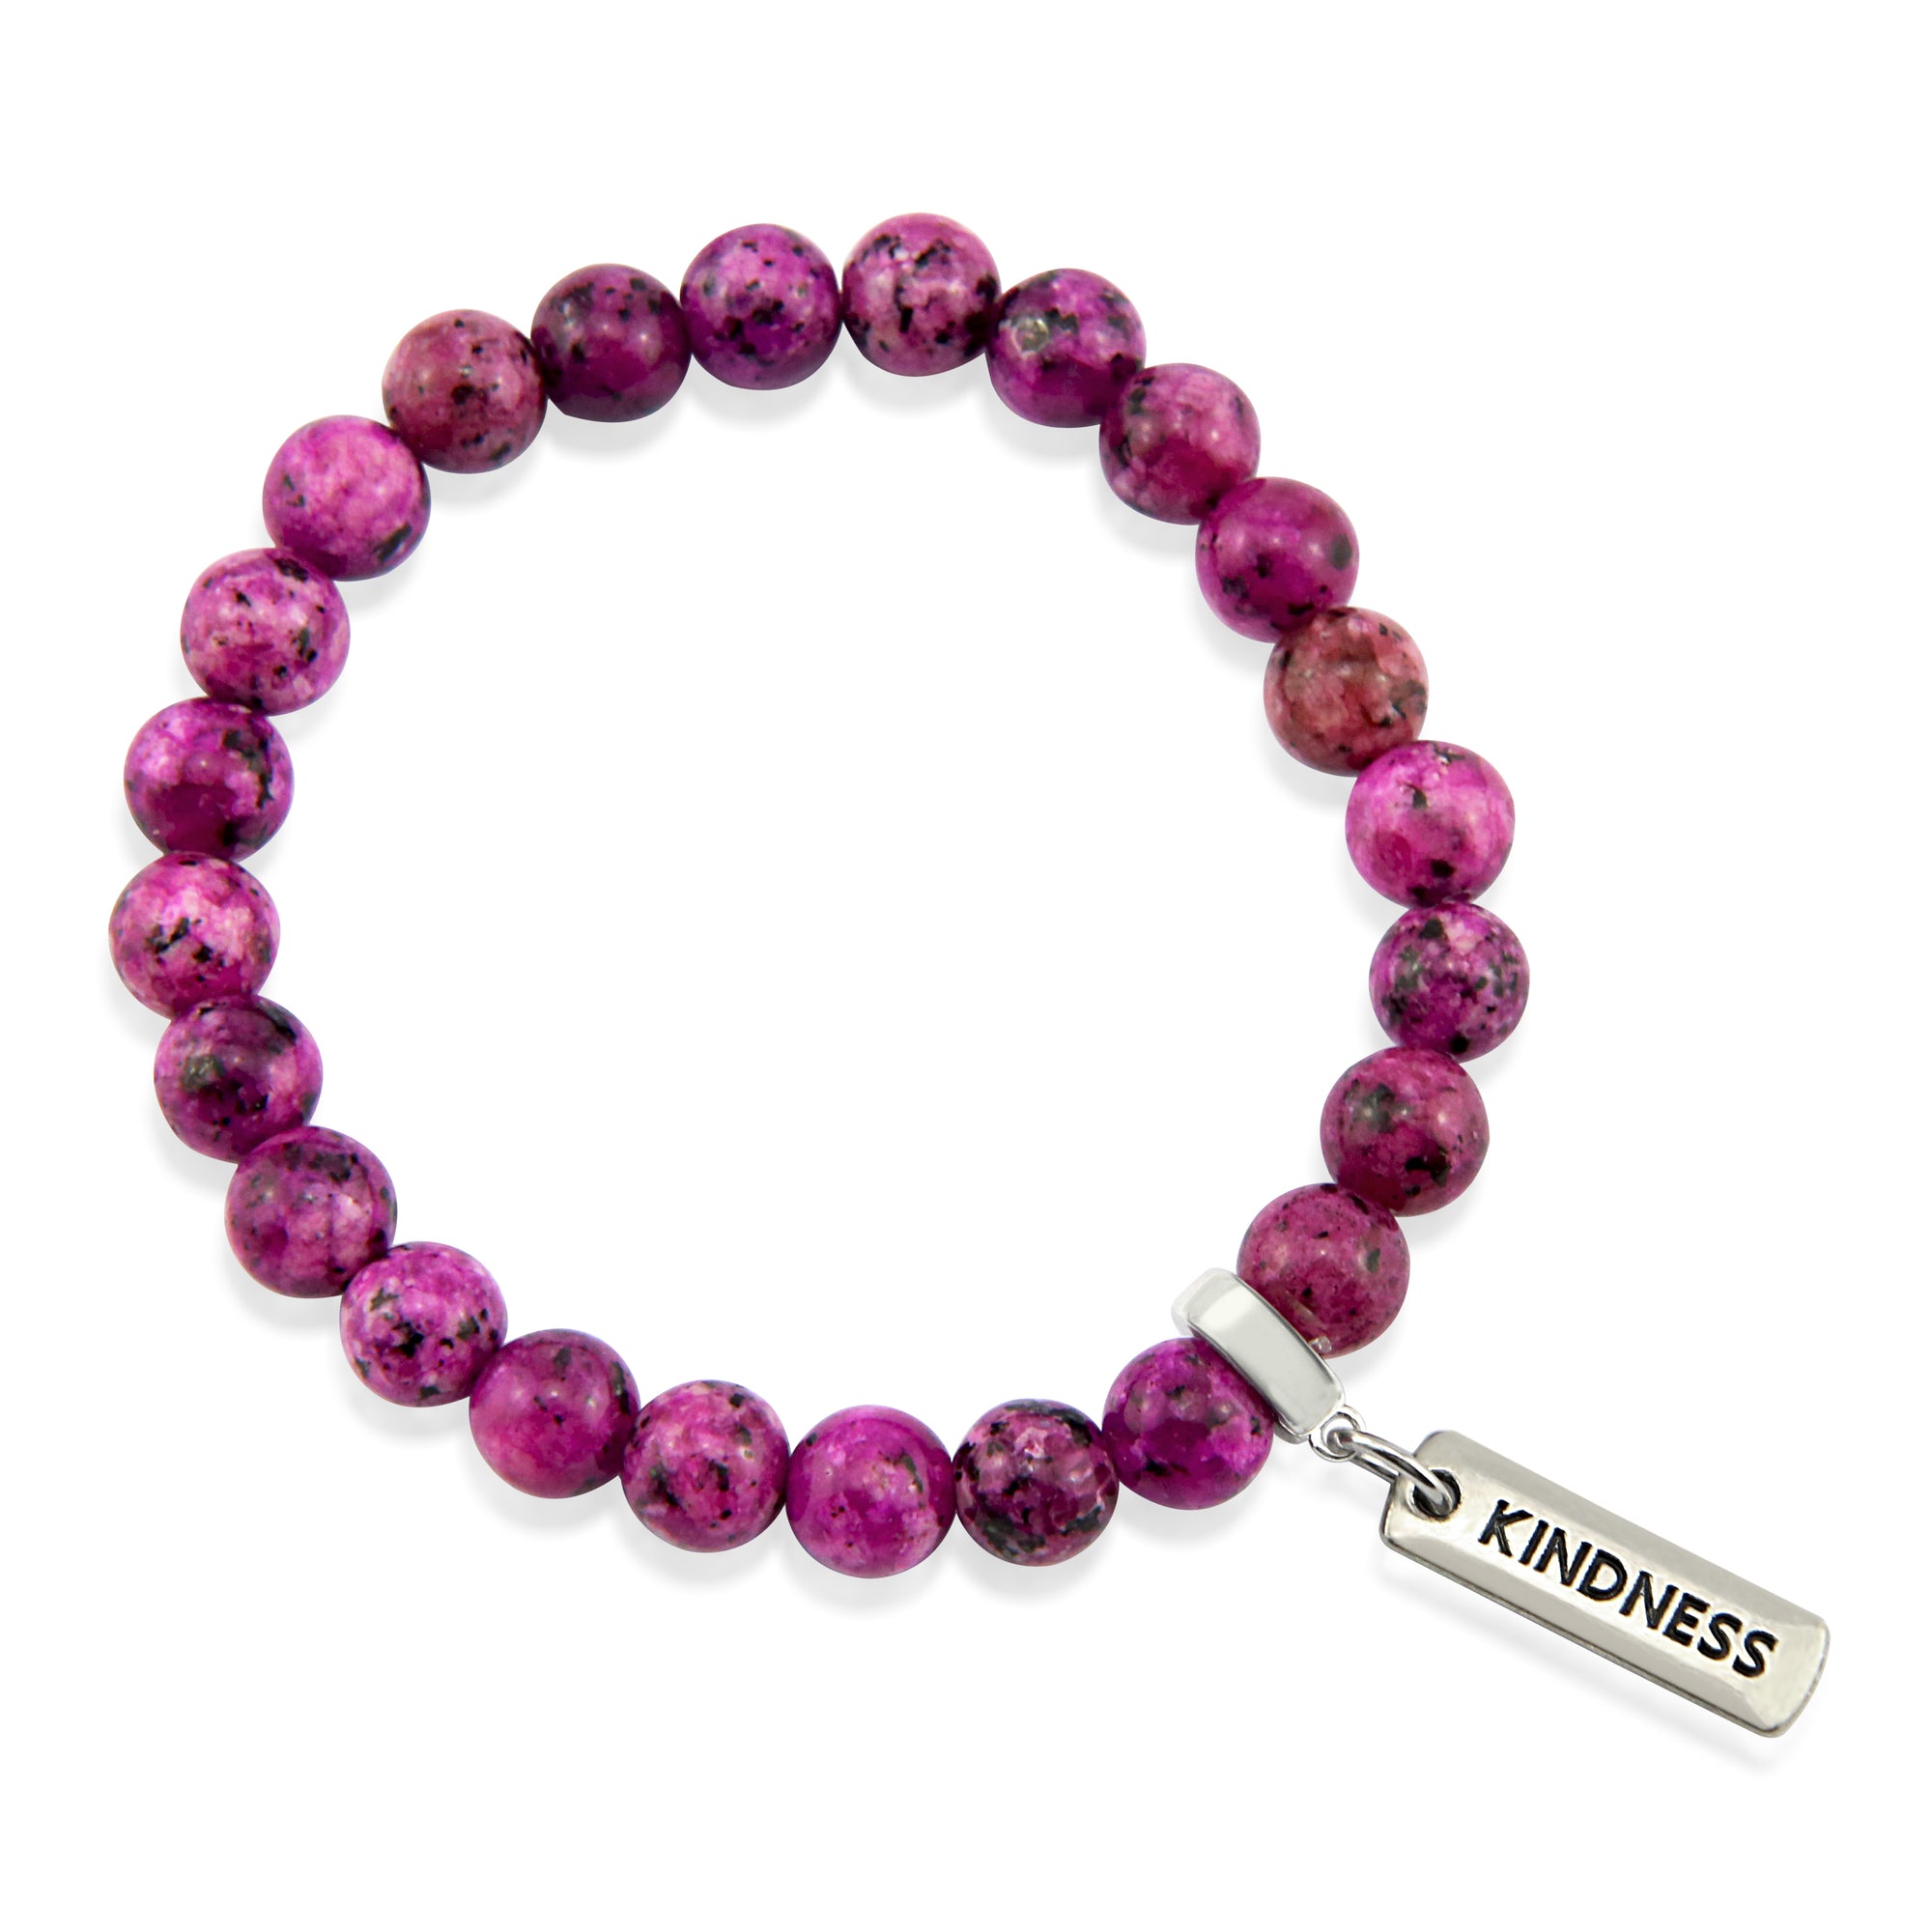 Stone Bracelet - Pink Raspberry Speckle 8mm beads - with Word Charm (5023)